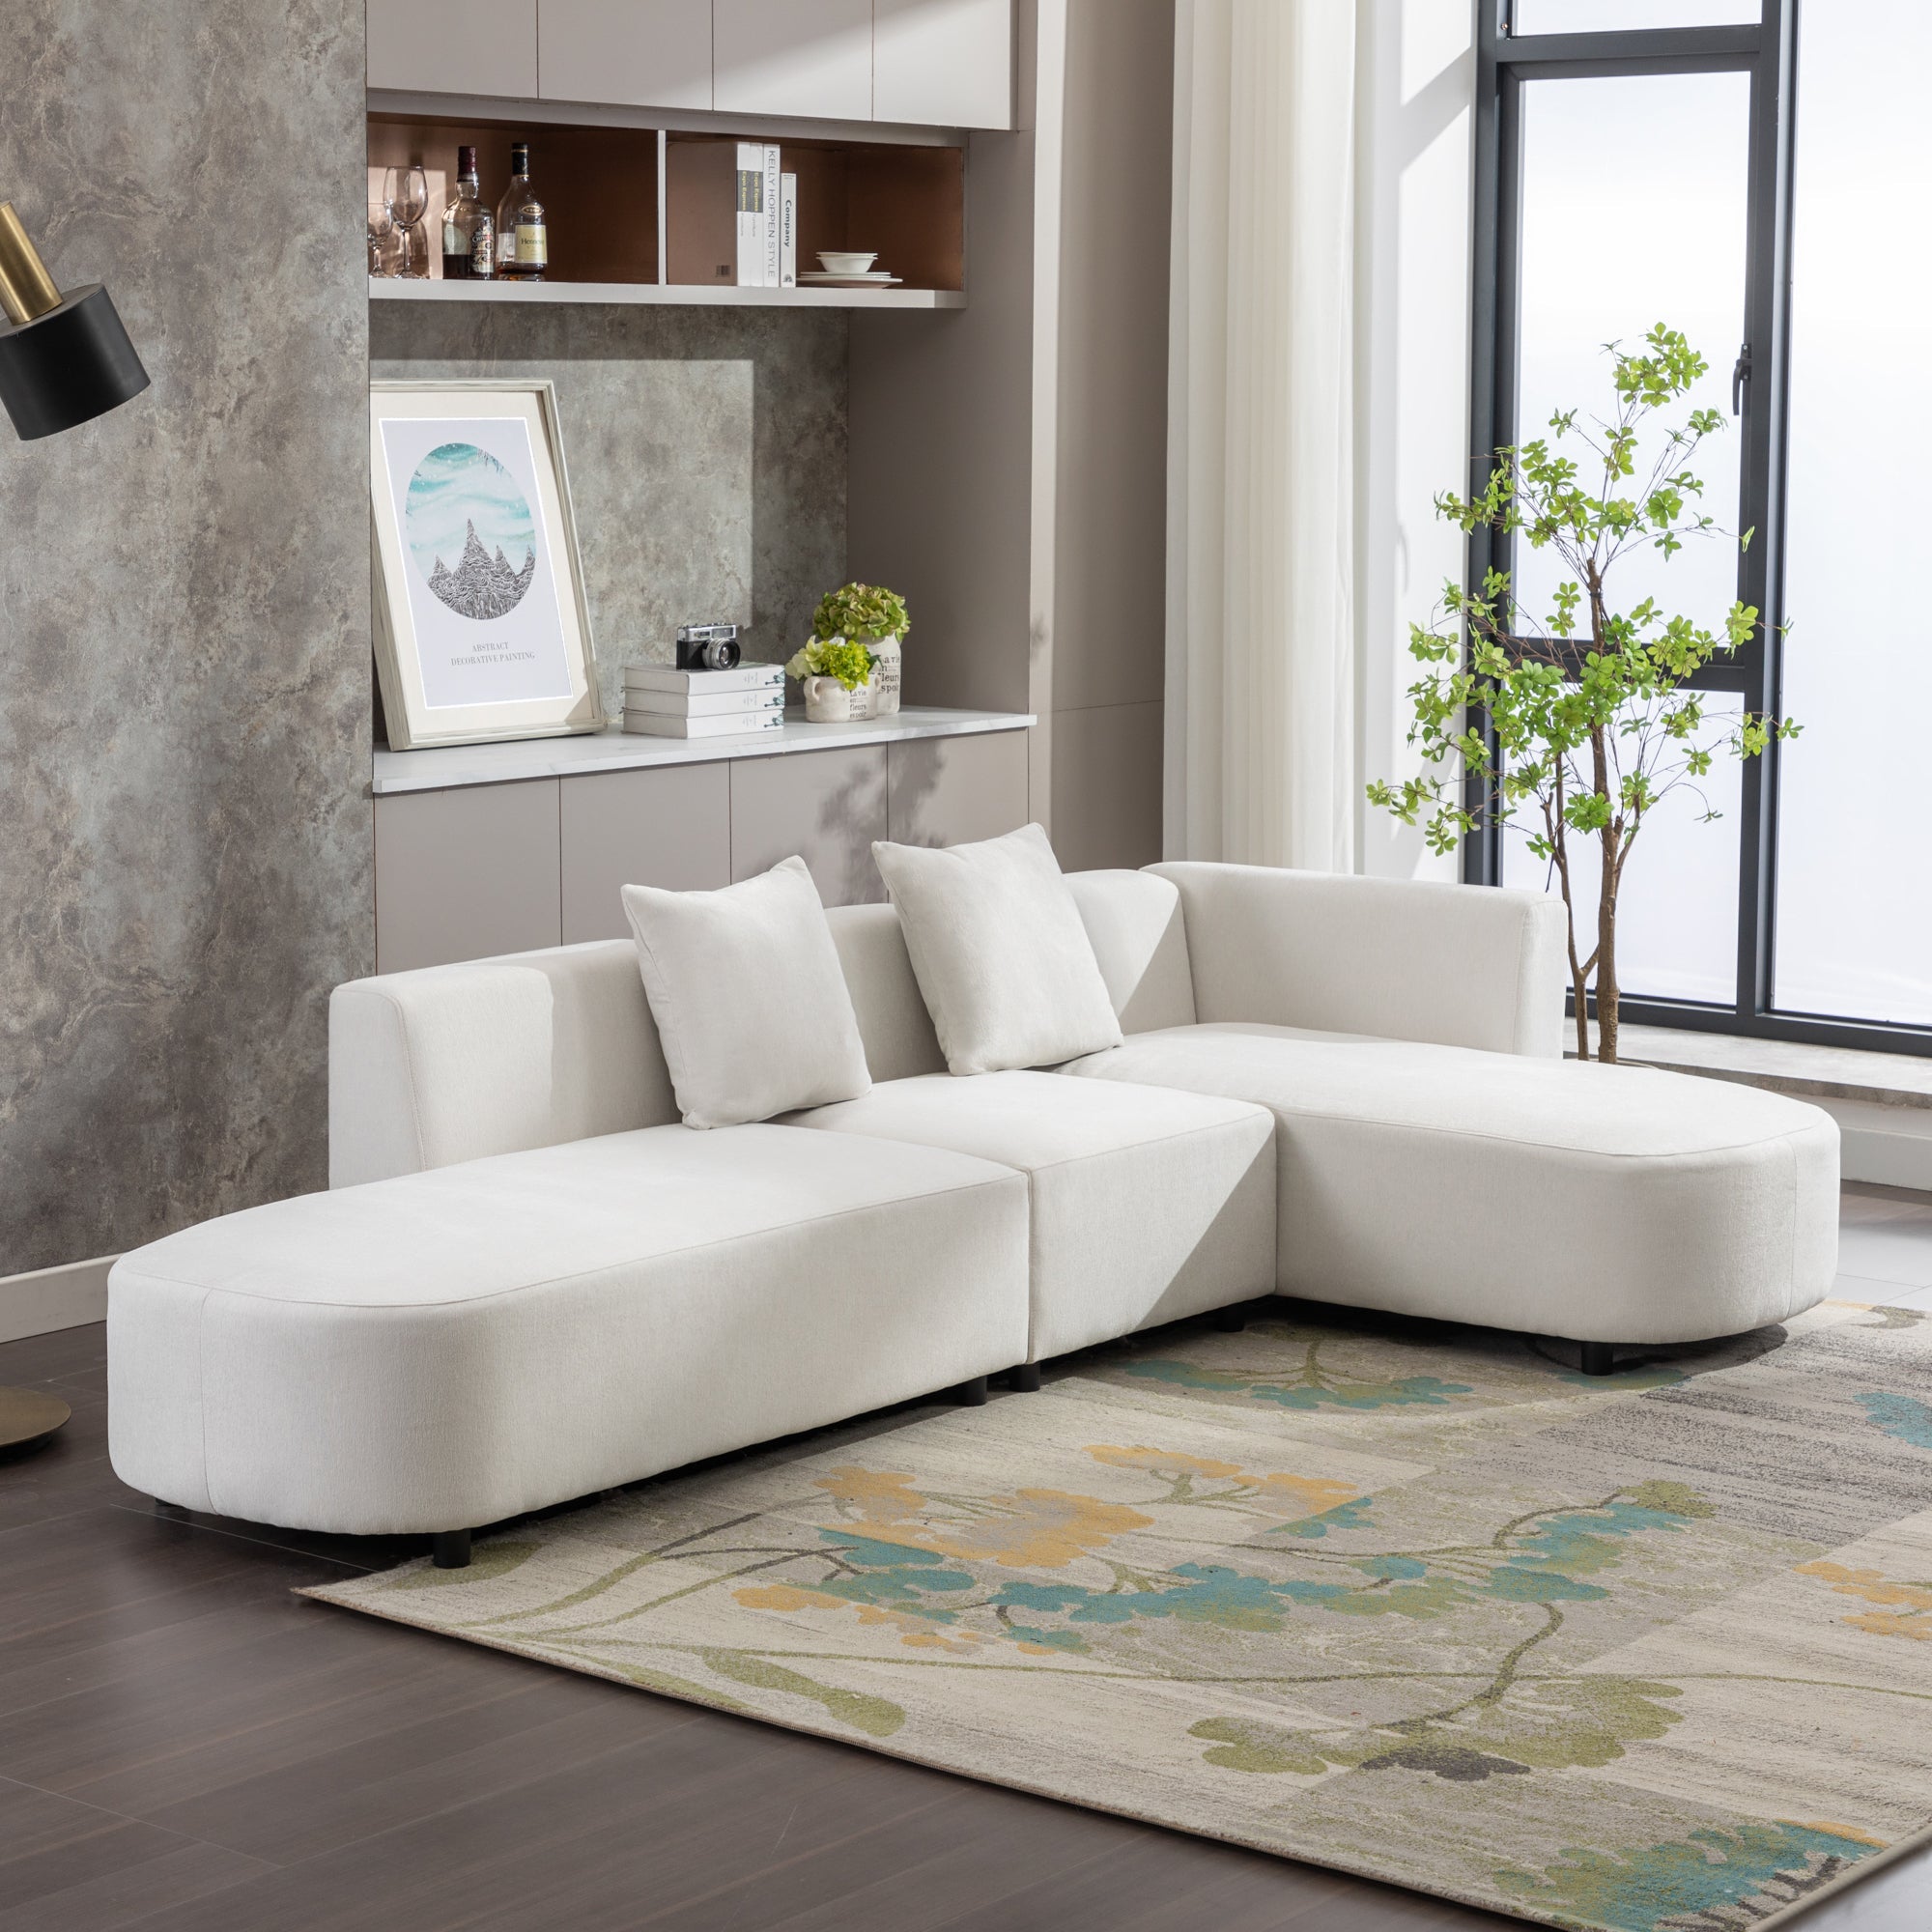 Beige Chenille L-Shaped Sectional Sofa | Luxury Modern Design-Stationary Sectionals-American Furniture Outlet